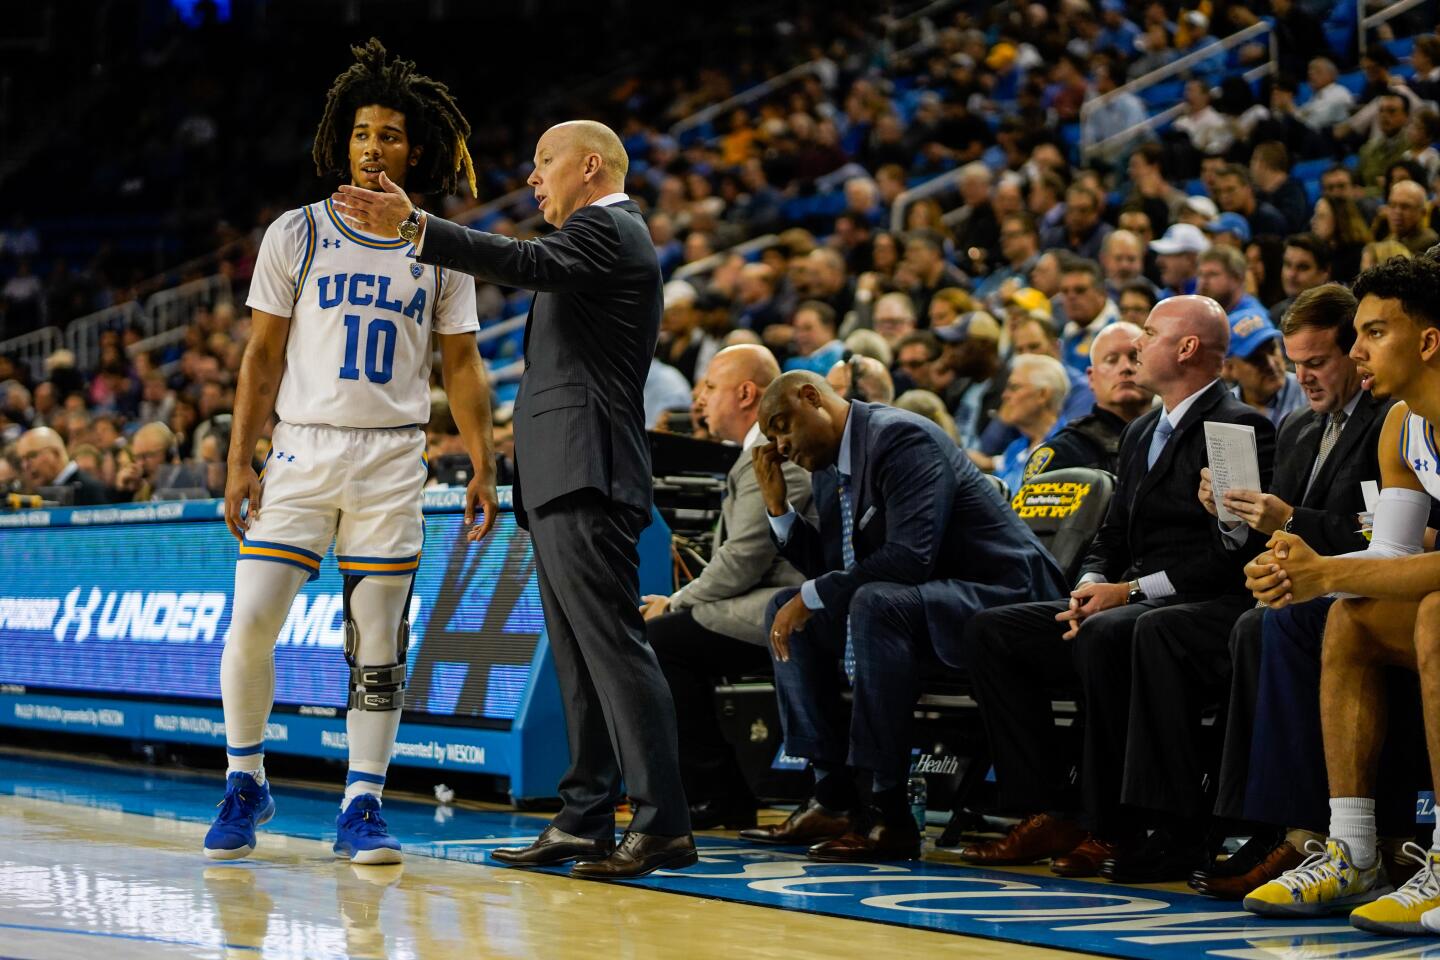 UCLA guard Tyger Campbell (10) talks with coach Mick Cronin on the sideline during the first half of a game against Long Beach State on Nov. 6 at Pauley Pavilion.